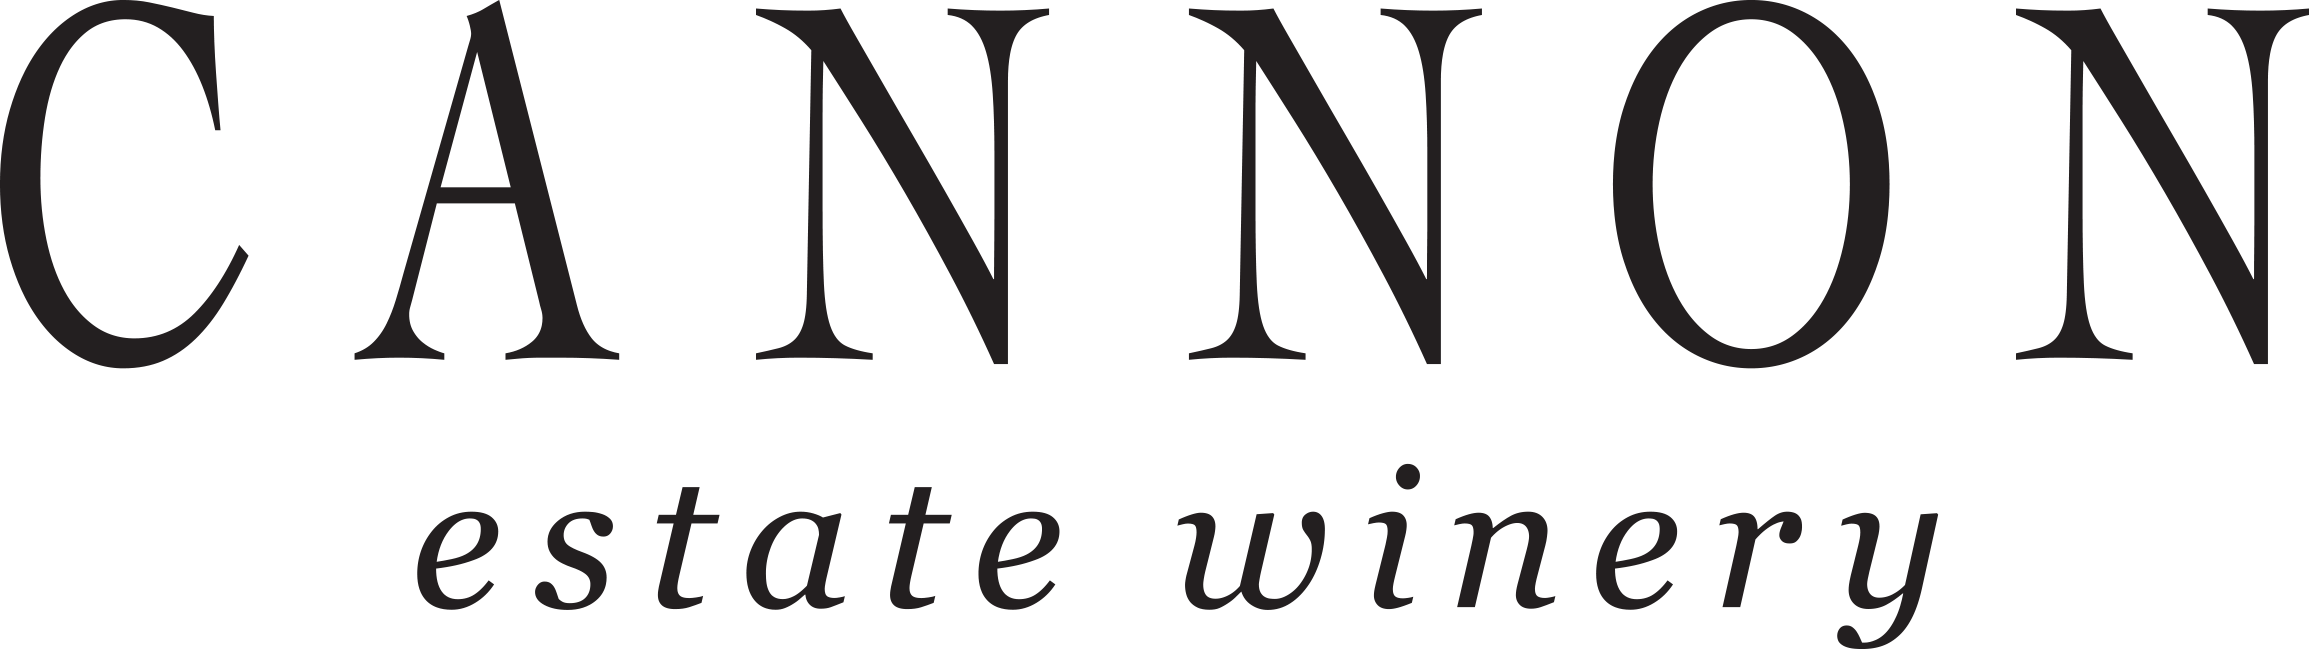 The image shows the logo for Cannon Estate Winery, presented in a sleek and modern style. The word 